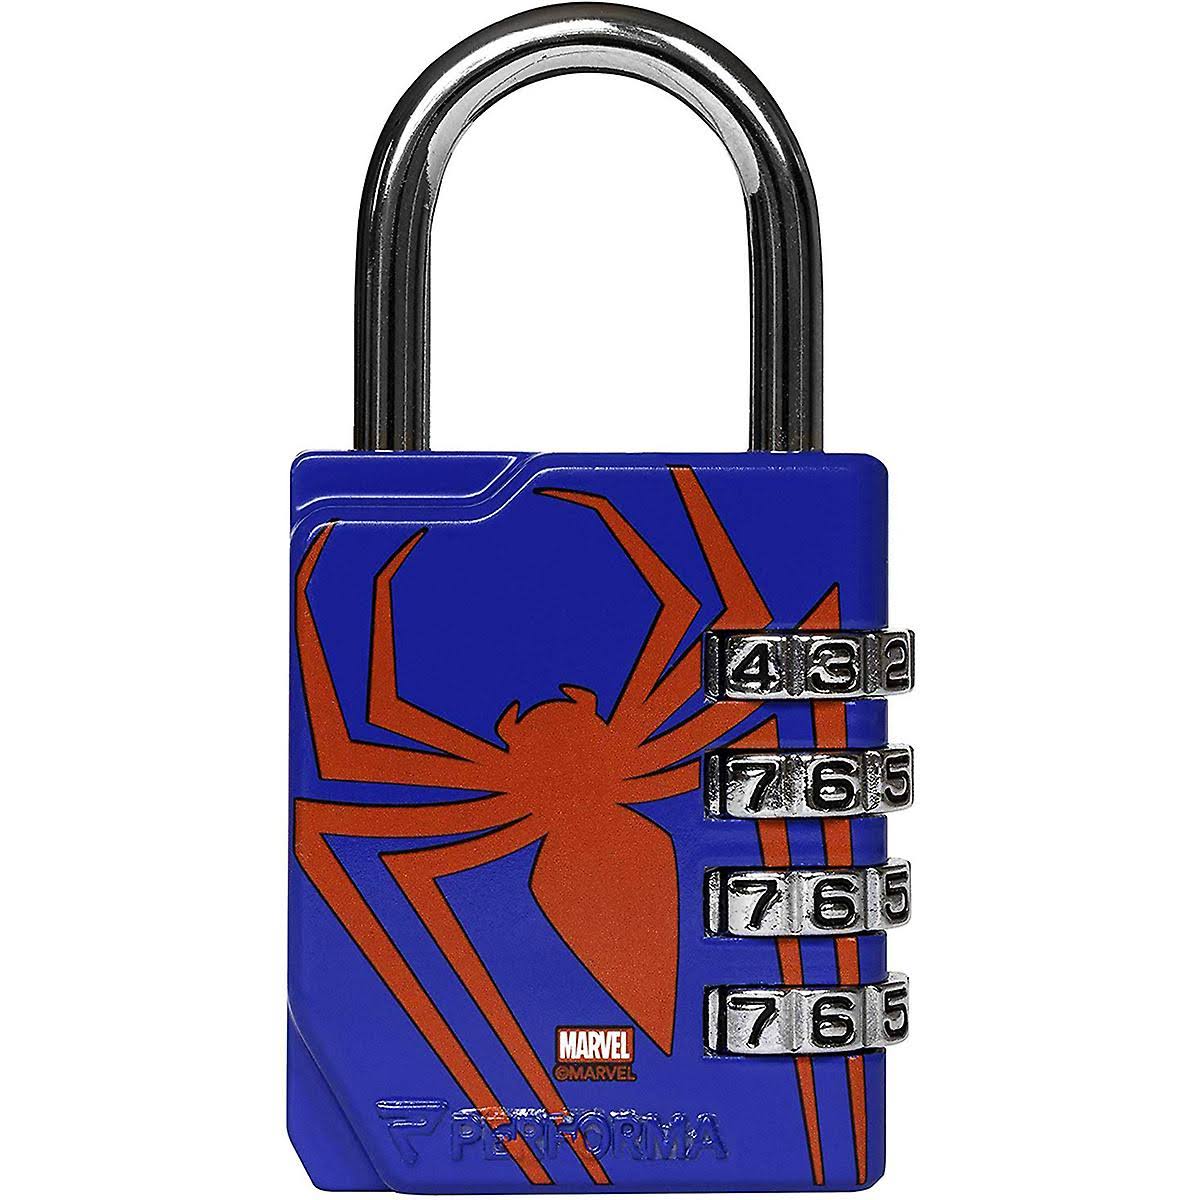 Performa Ultra Premium Embossed 4-Dial Combination Gym Lock - Spider-Man One Size